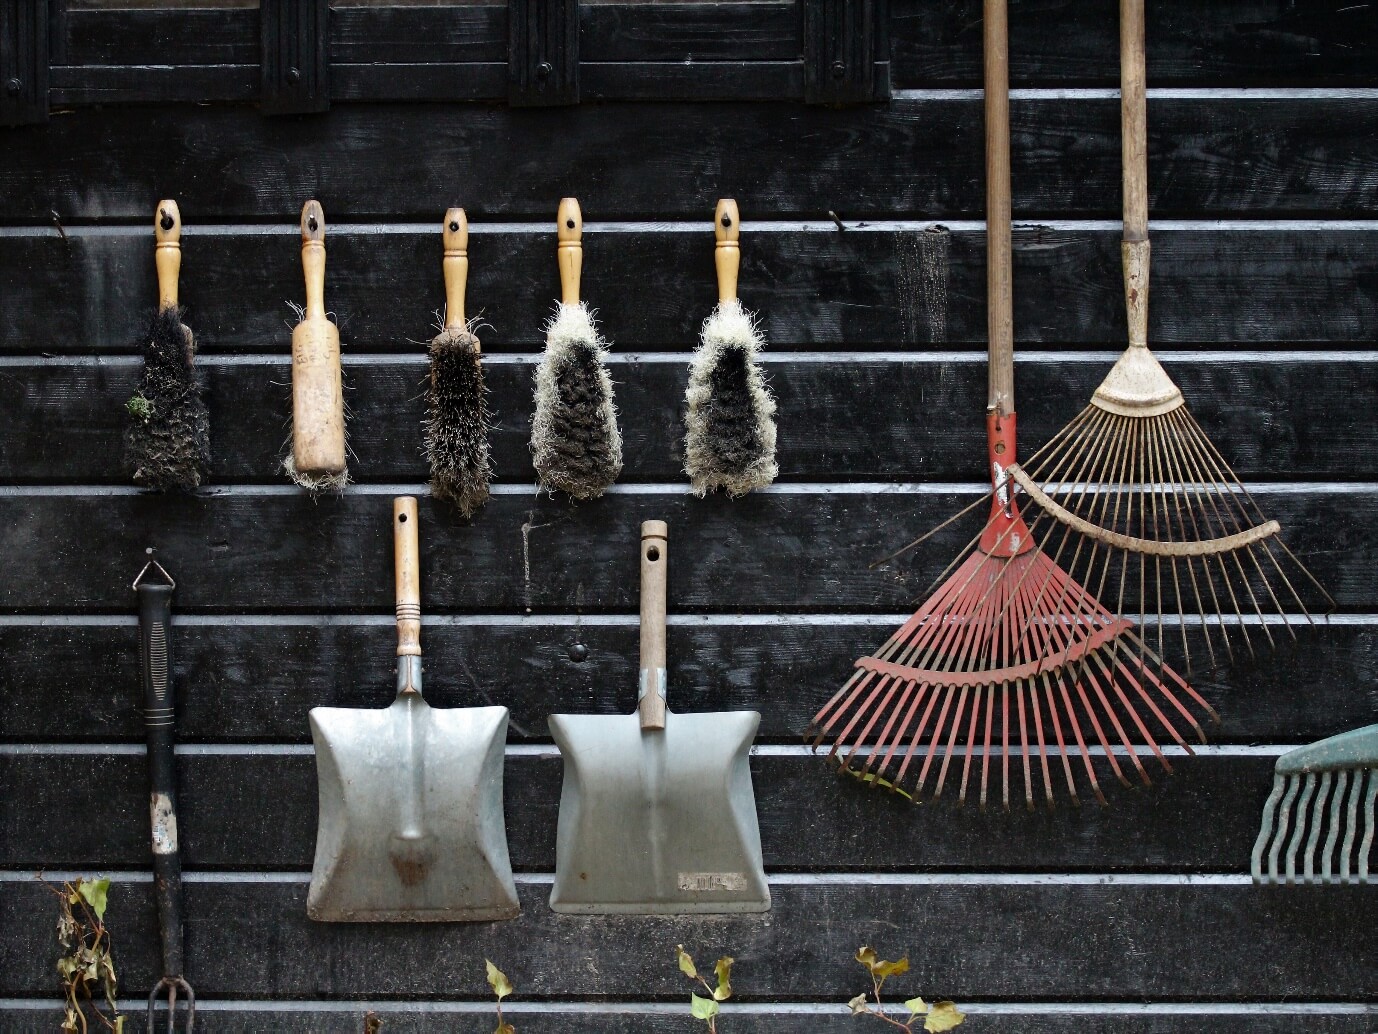 A group of brooms and rakes on a wall

Description automatically generated